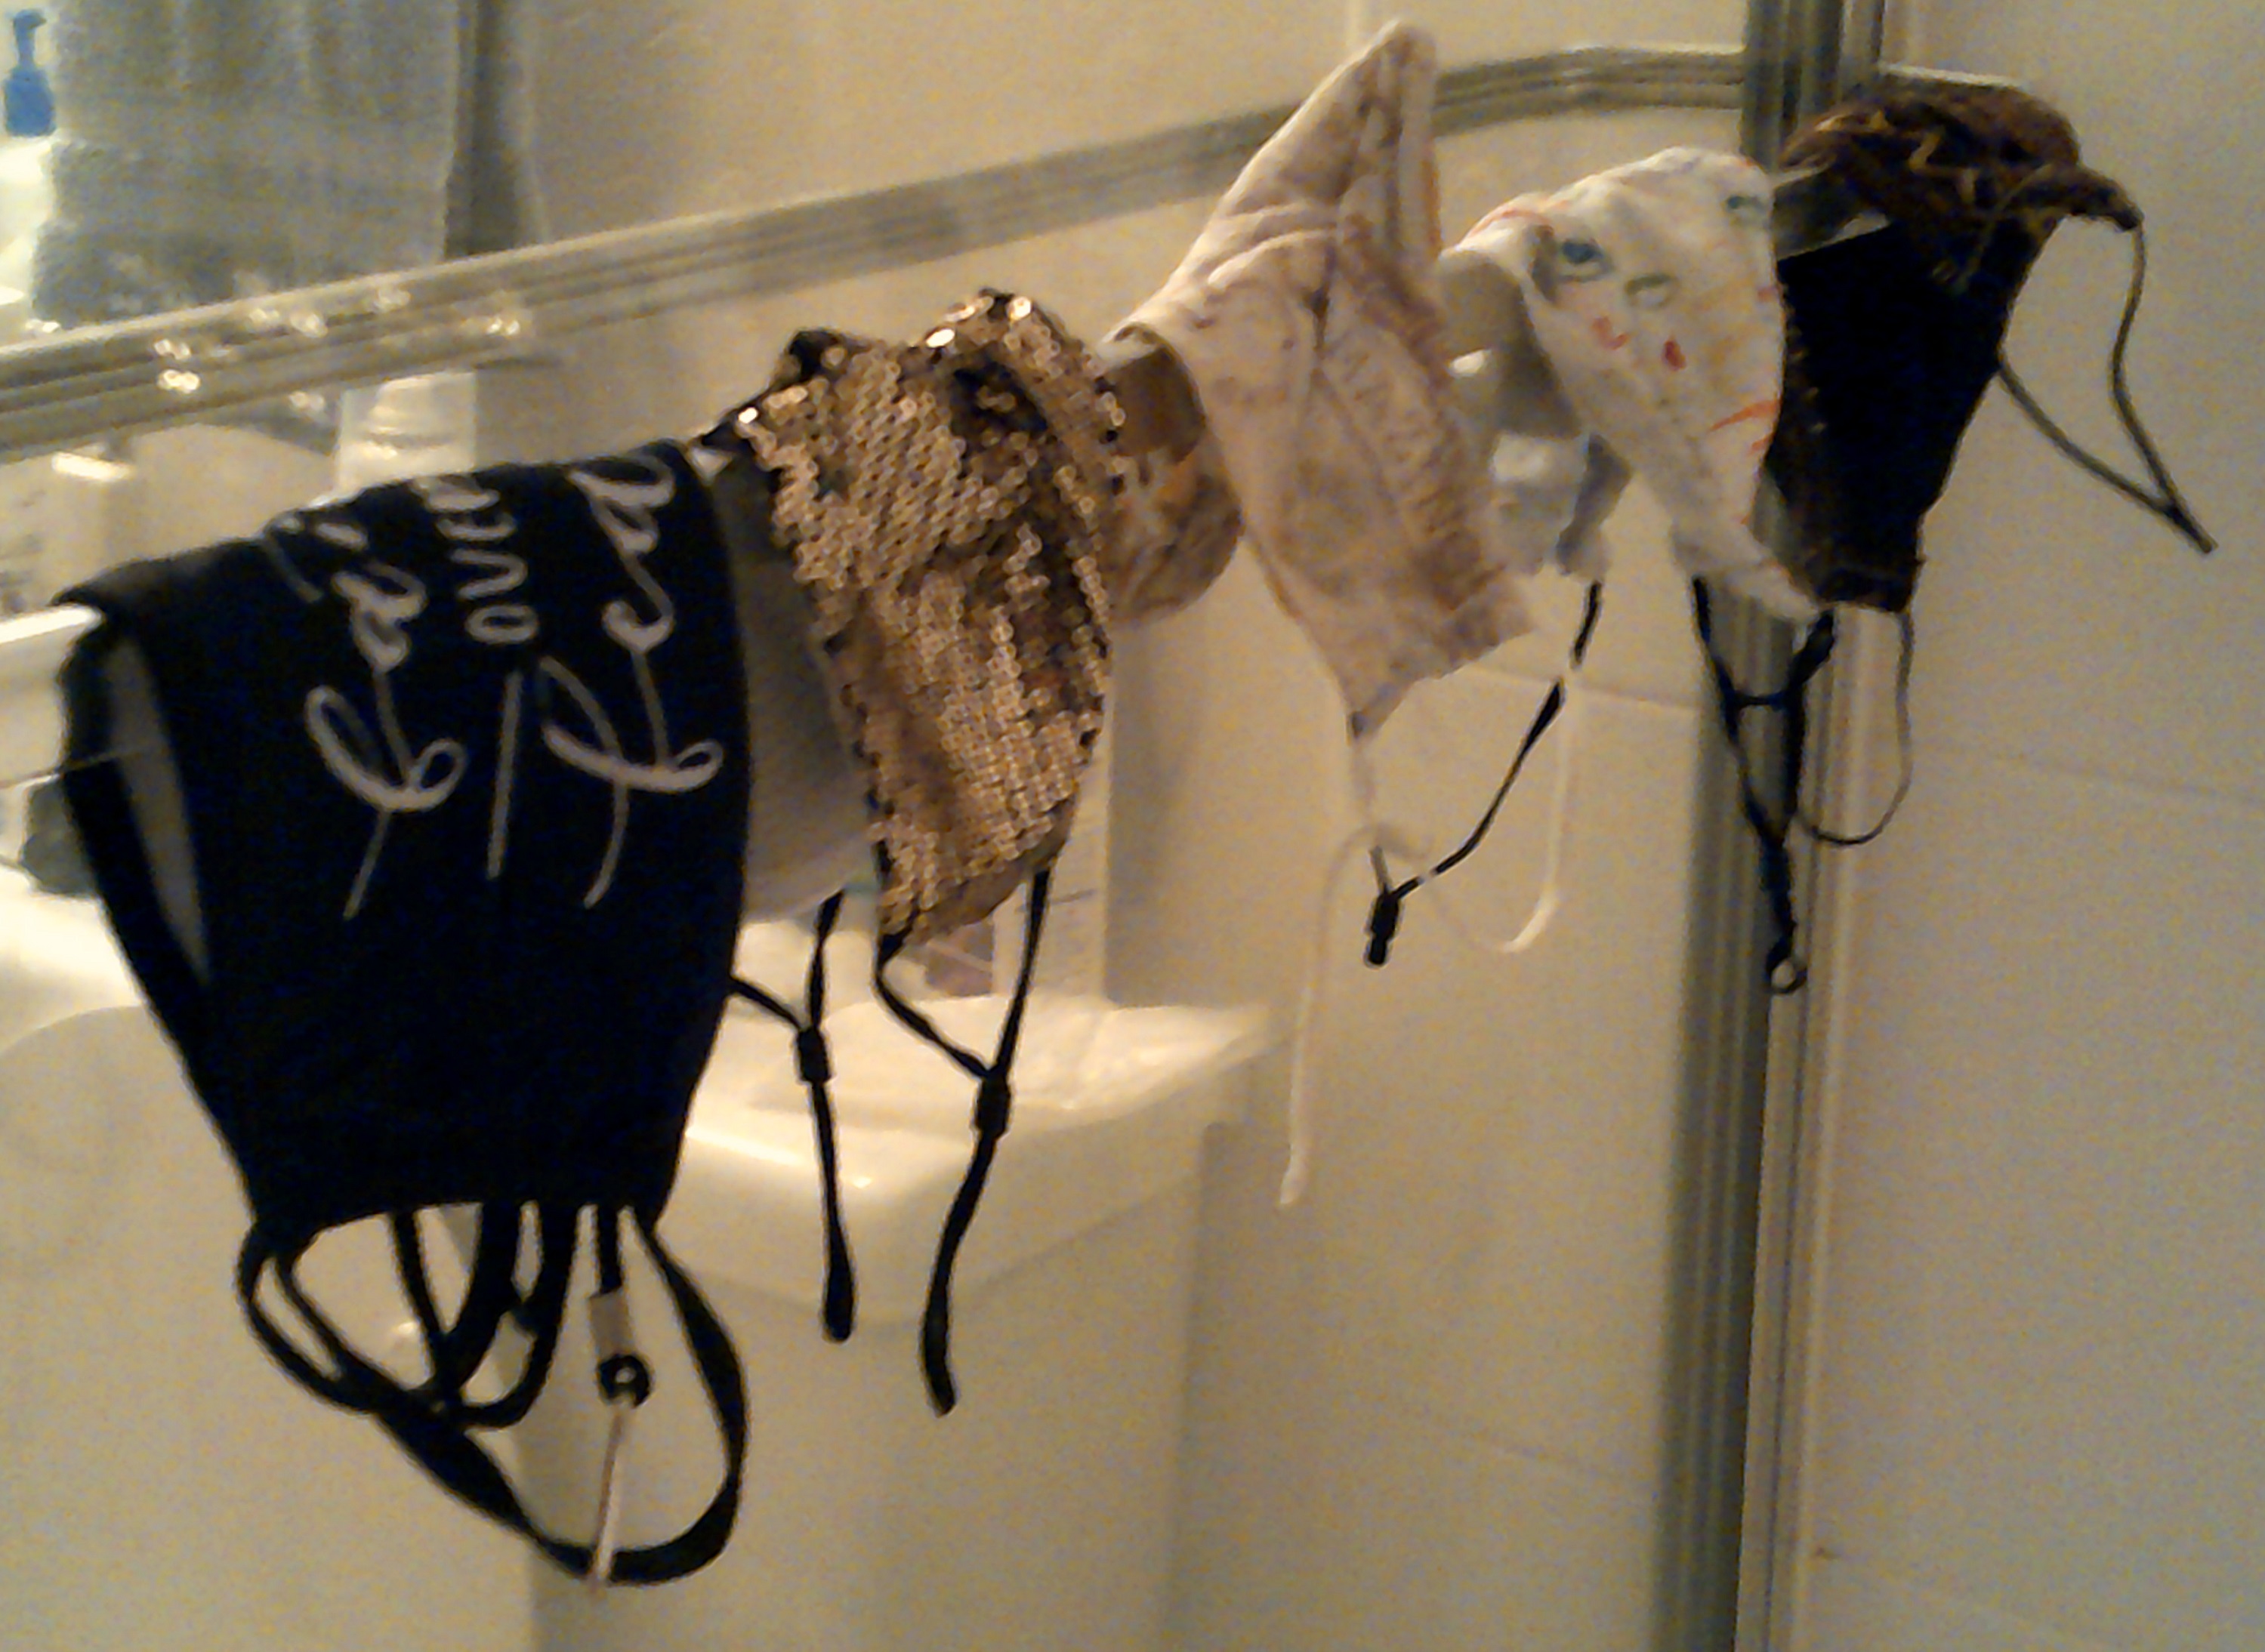 Photo I took of the masks I washed drying in the shower.